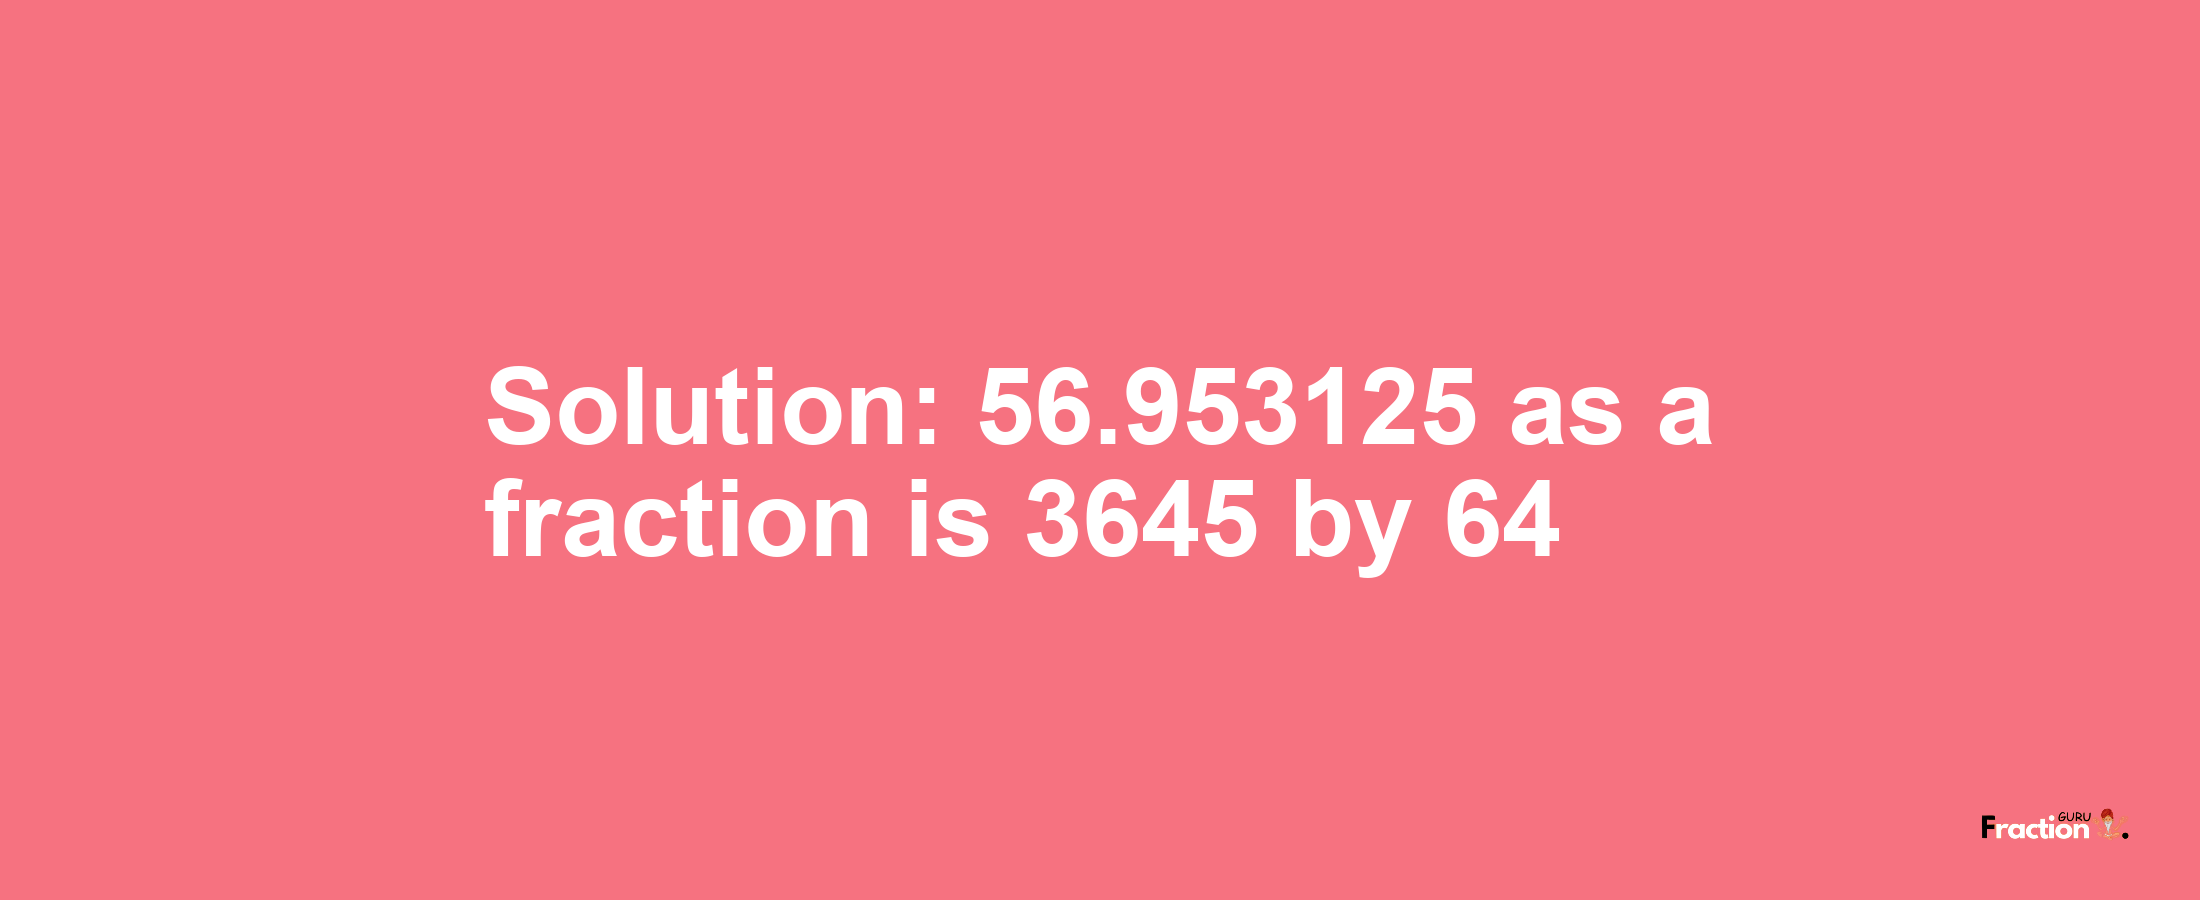 Solution:56.953125 as a fraction is 3645/64